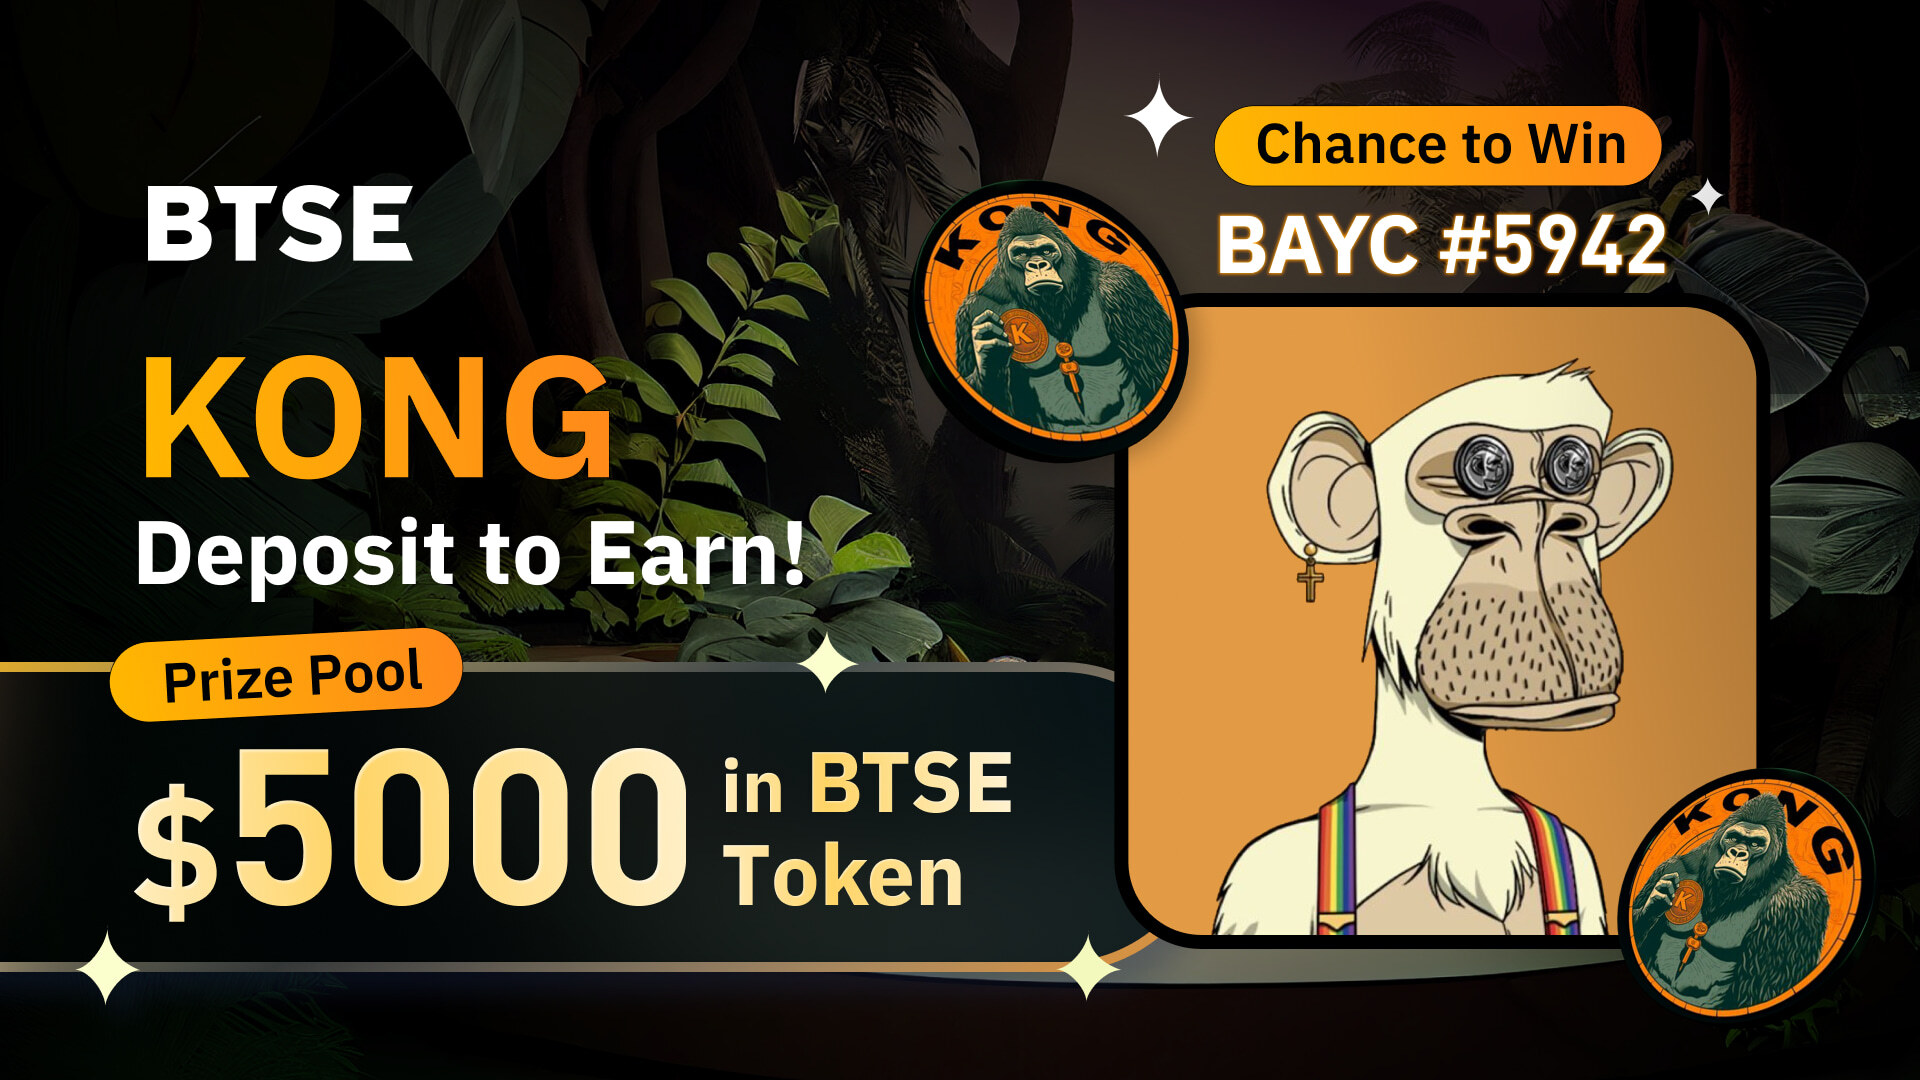 BAYC Giveaway + Deposit to Share $5,000 in BTSE!